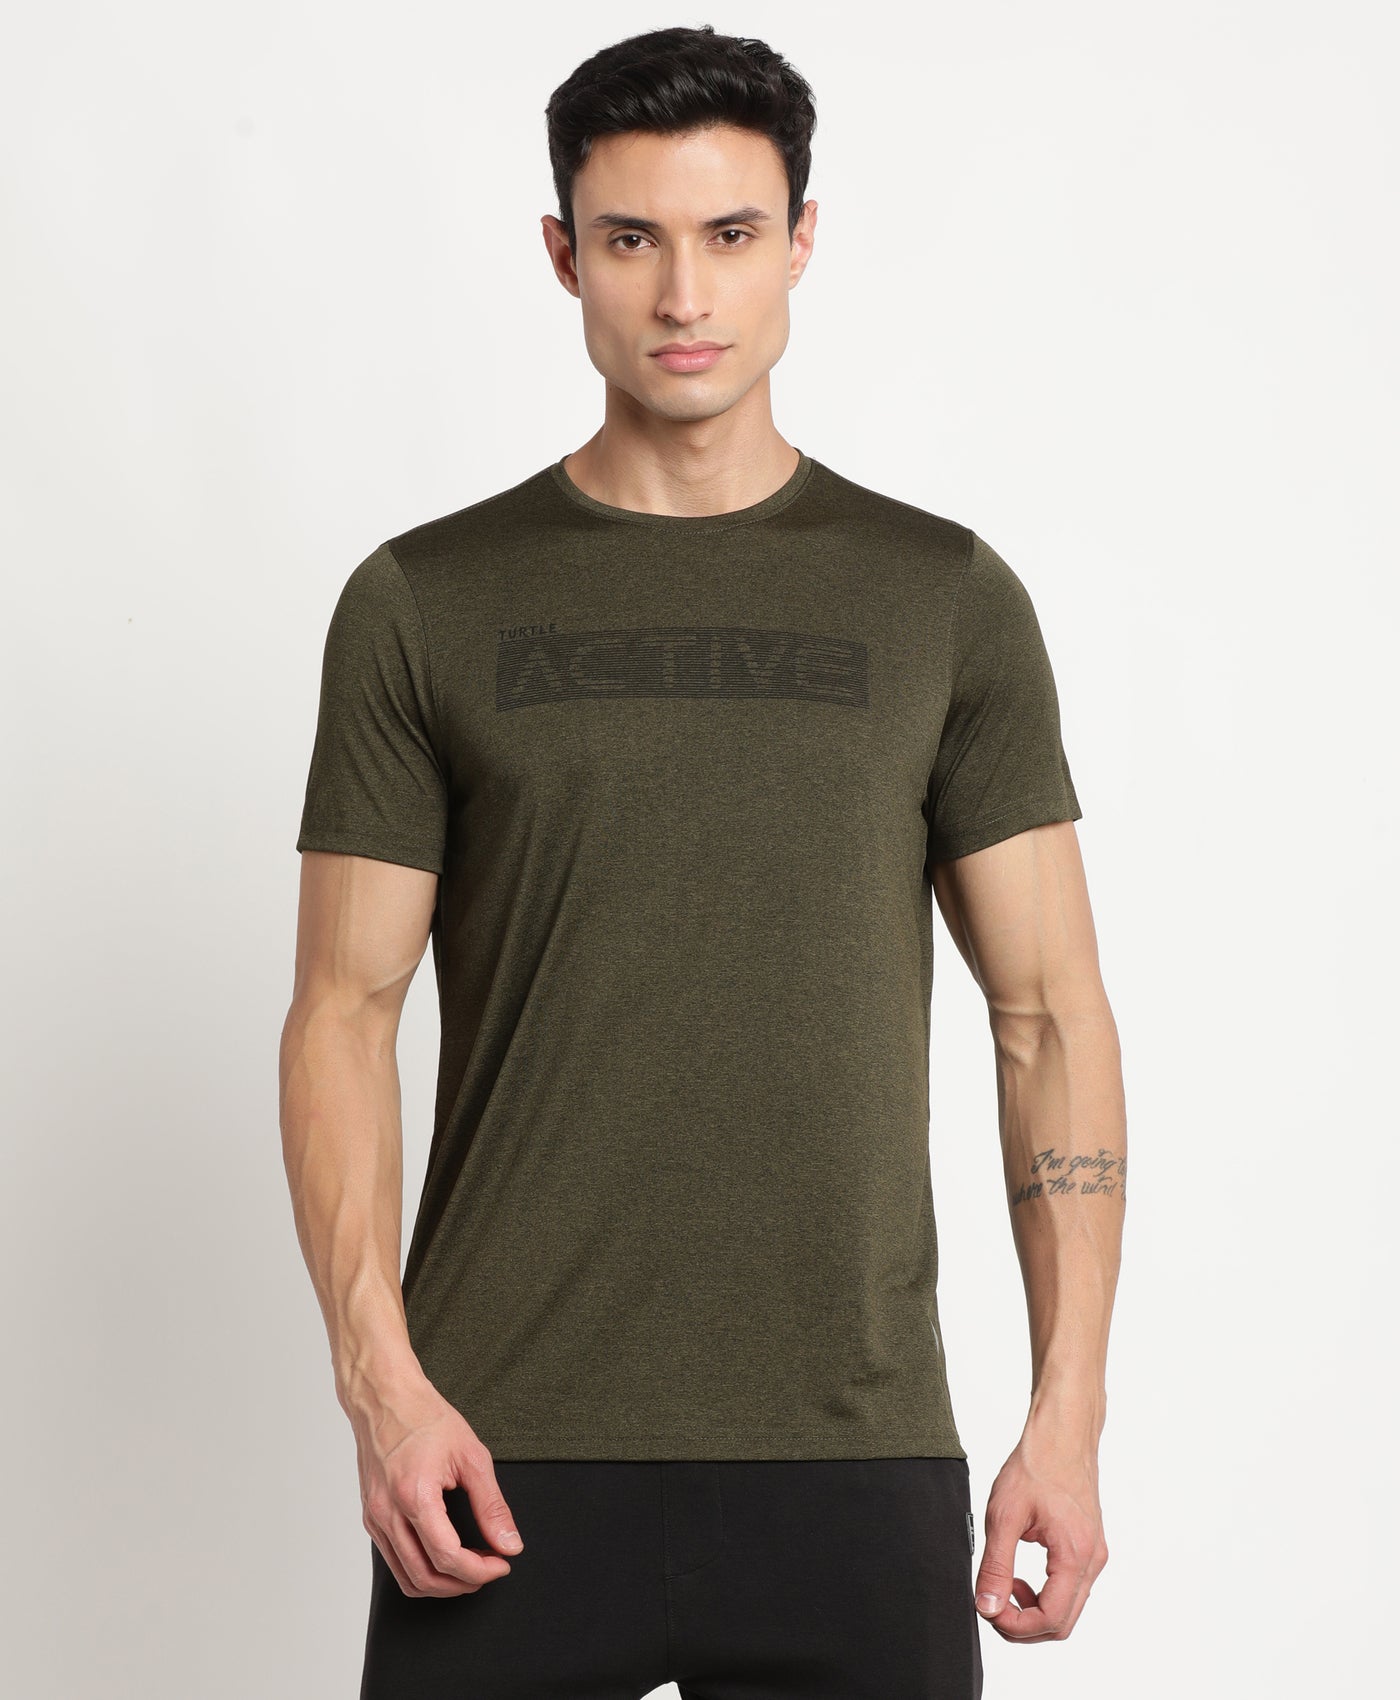 Polyester Olive Printed Crew Neck Half Sleeve Active T-Shirt